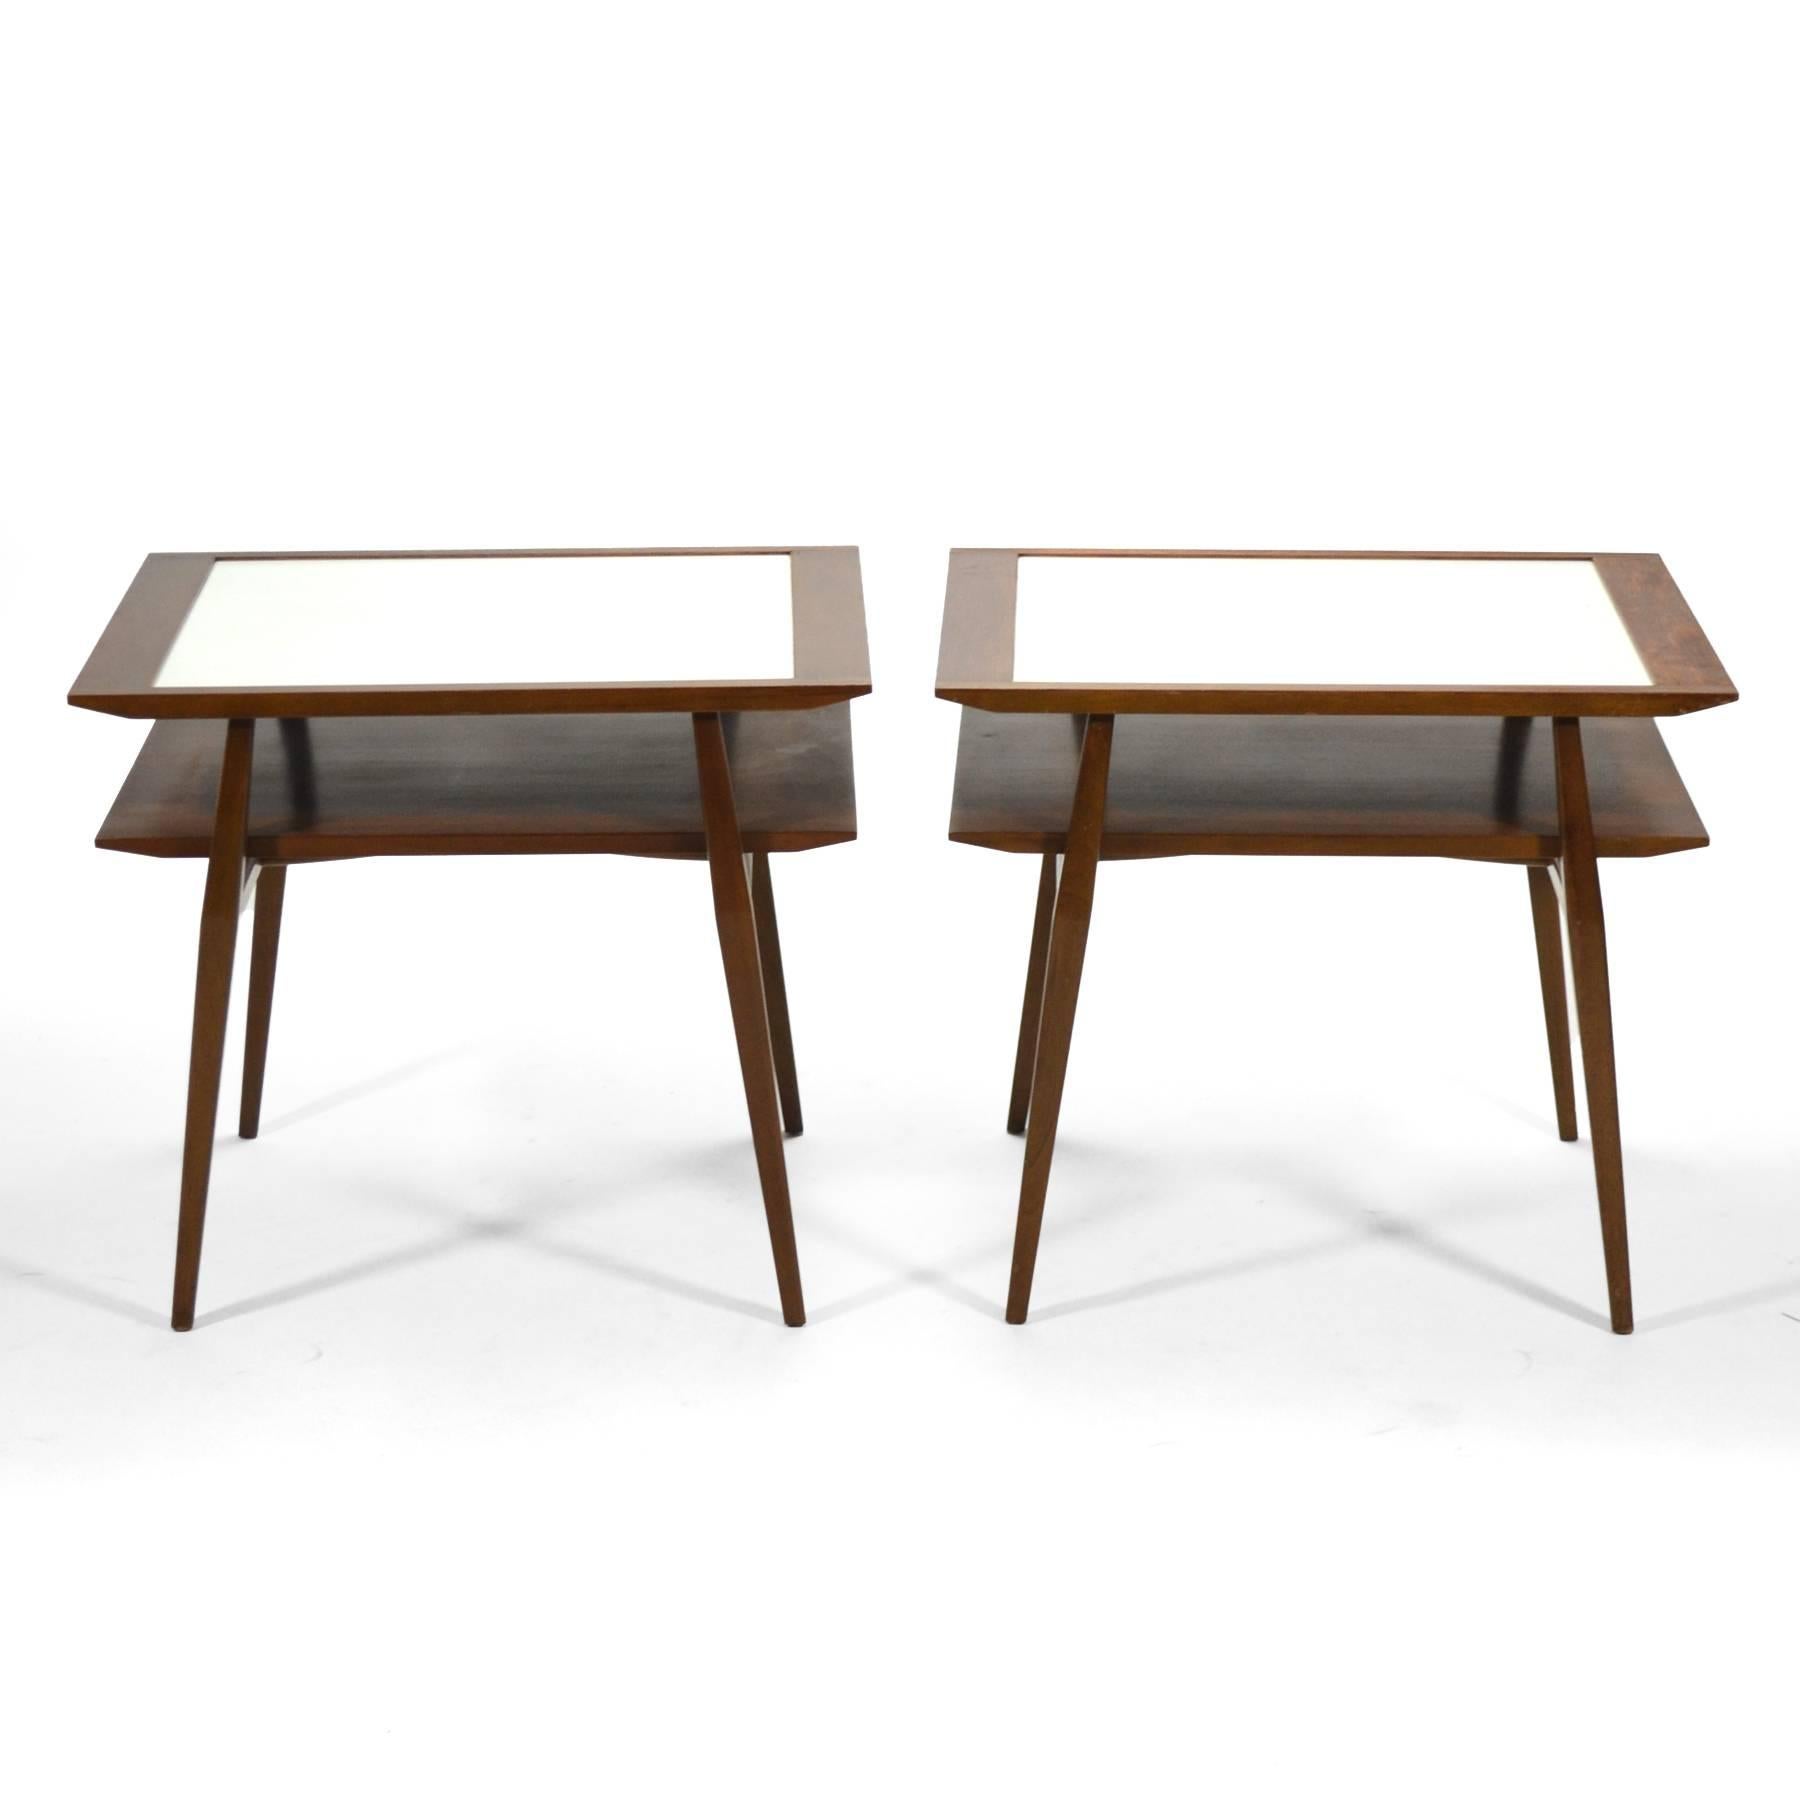 Mid-20th Century Bertha Schaefer Pair of End Tables by Singer & Sons For Sale